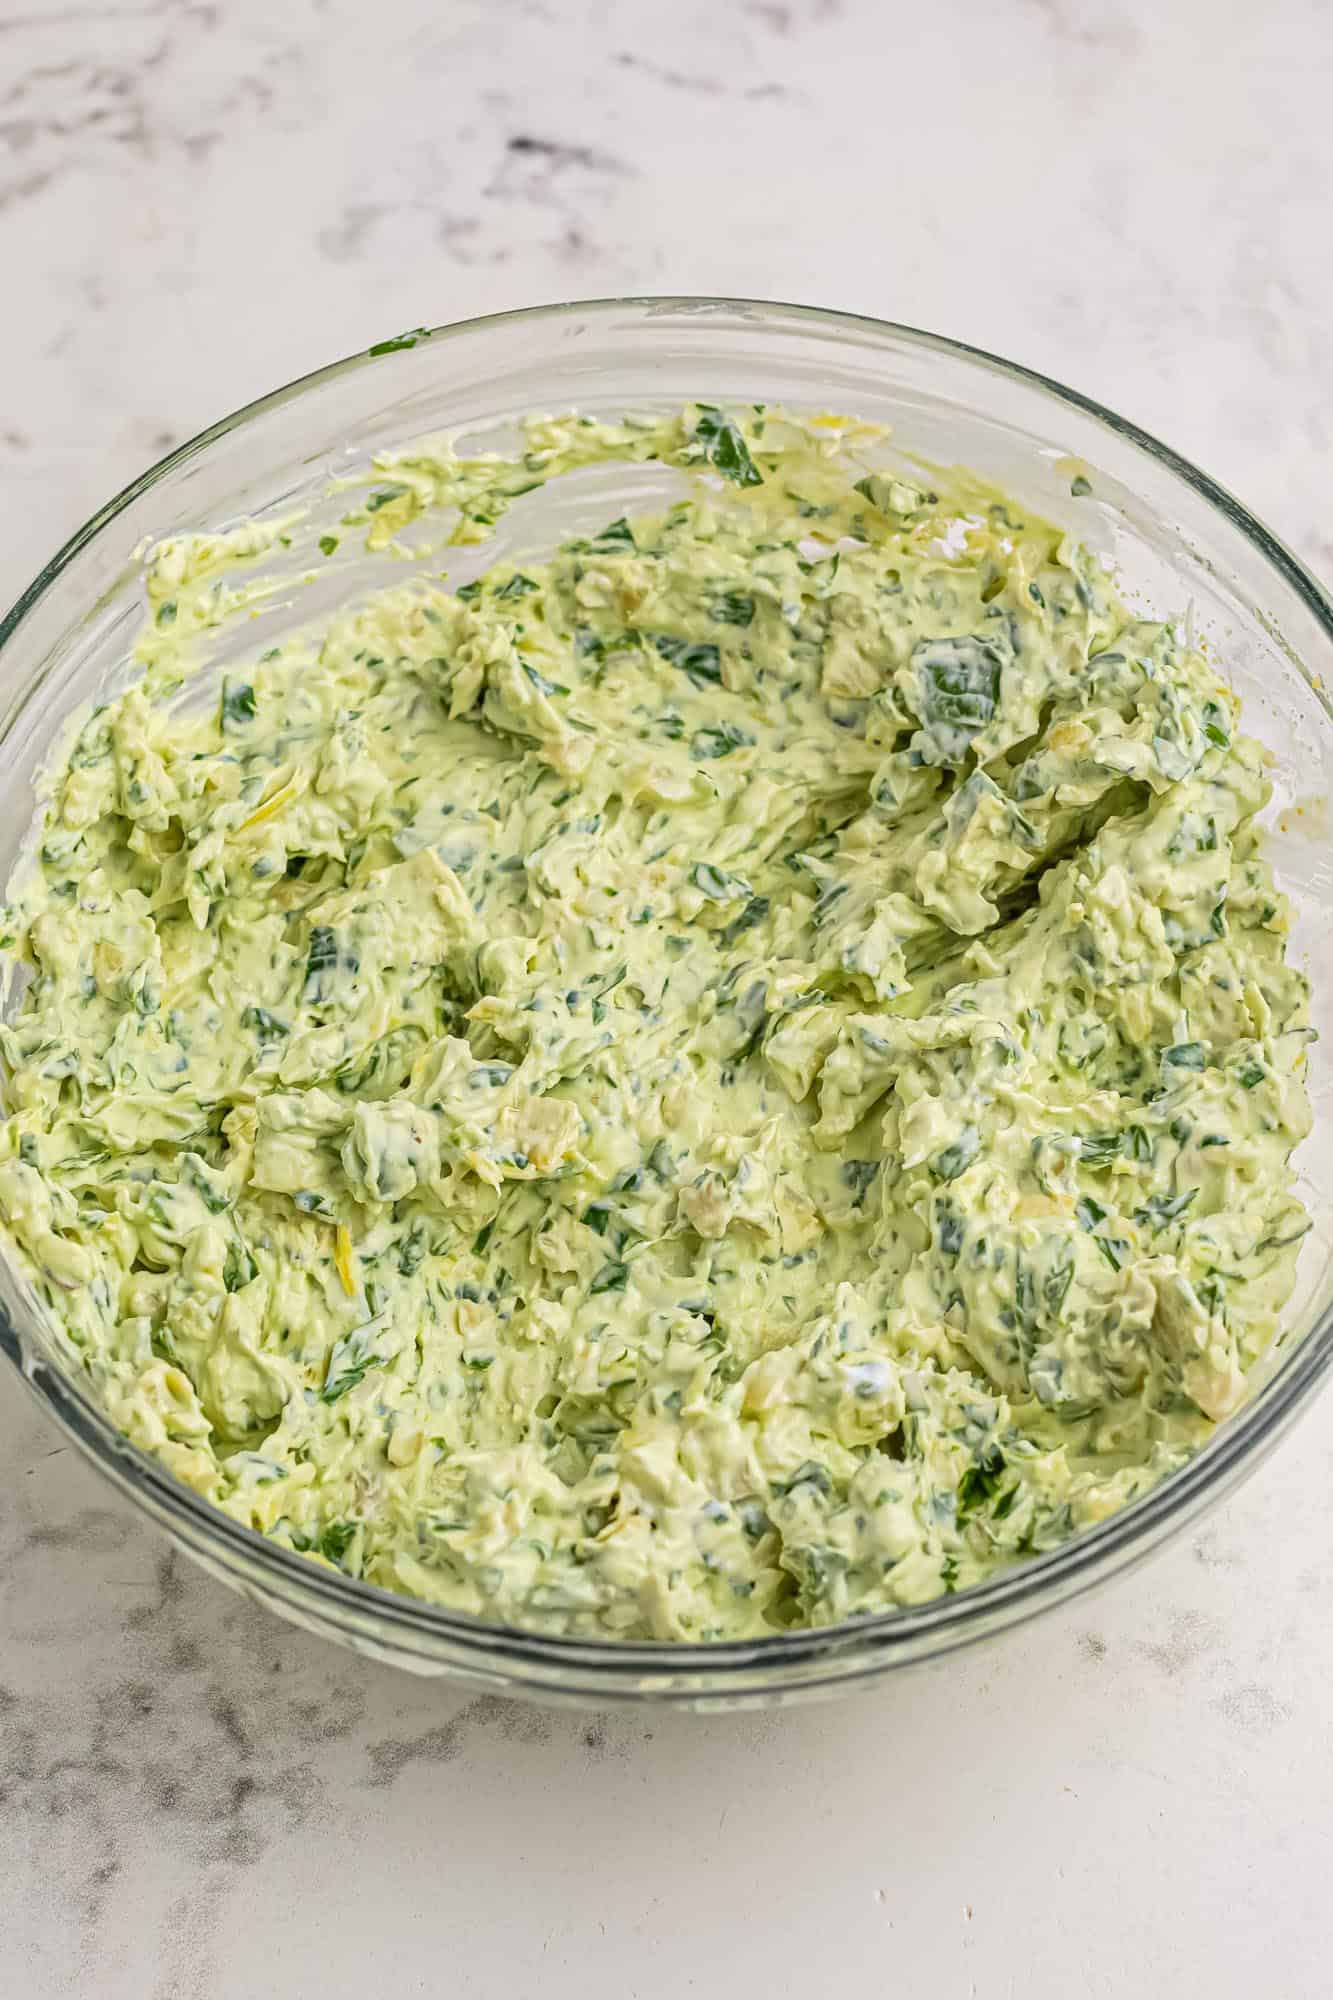 cold spinach artichoke dip in a glass mixing bowl.